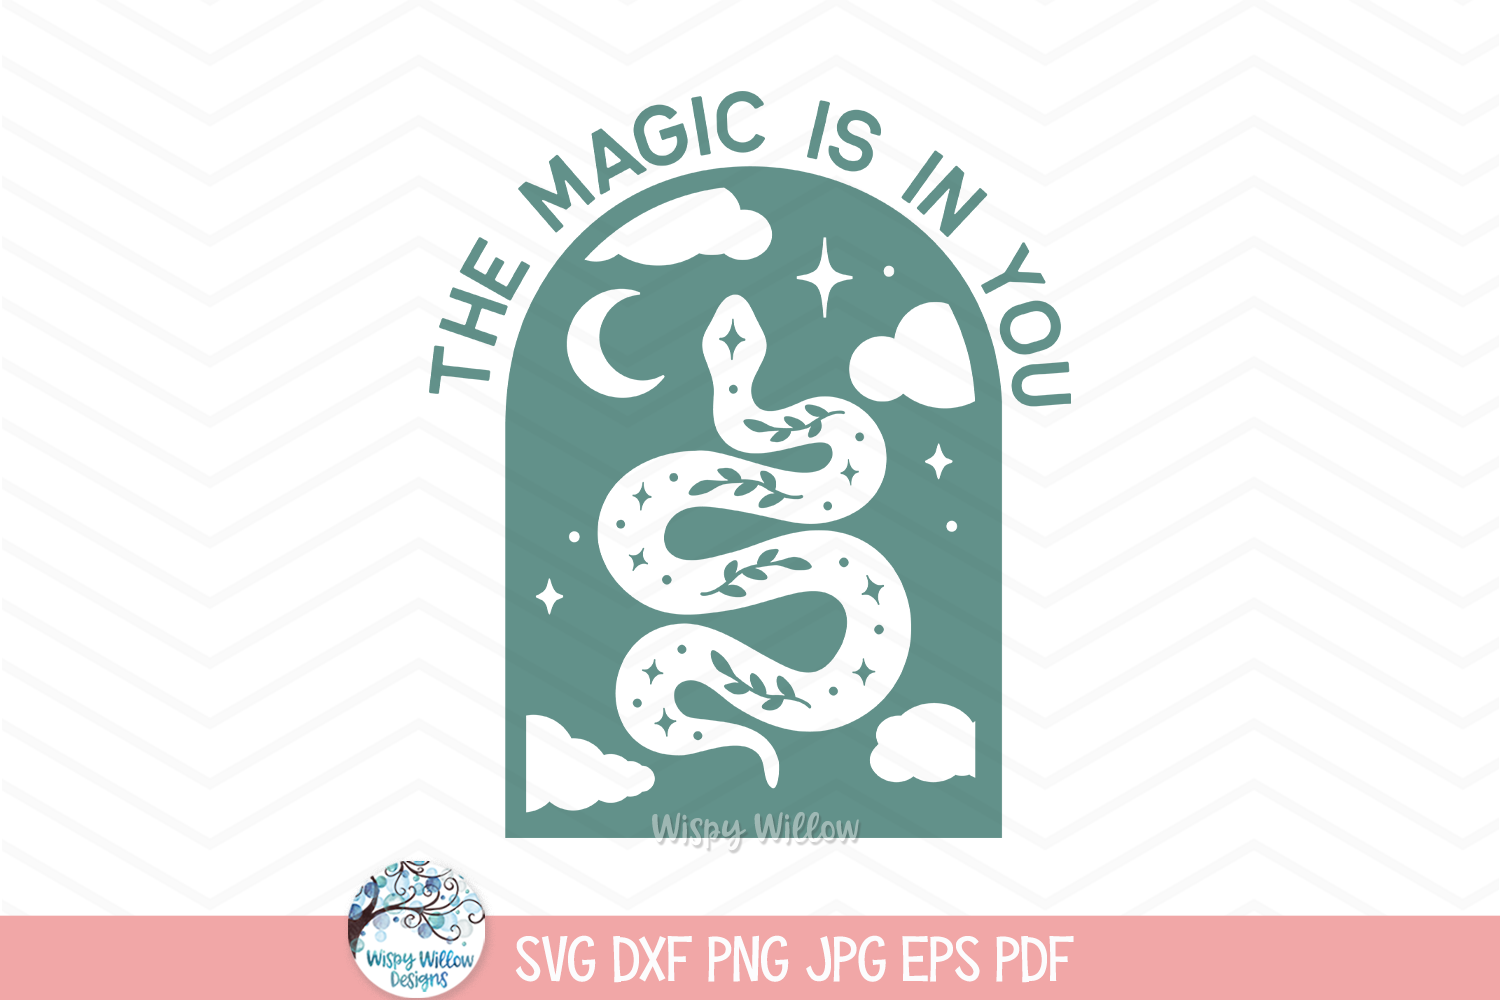 The Magic Is In You SVG | Serpent and Stars Graphic